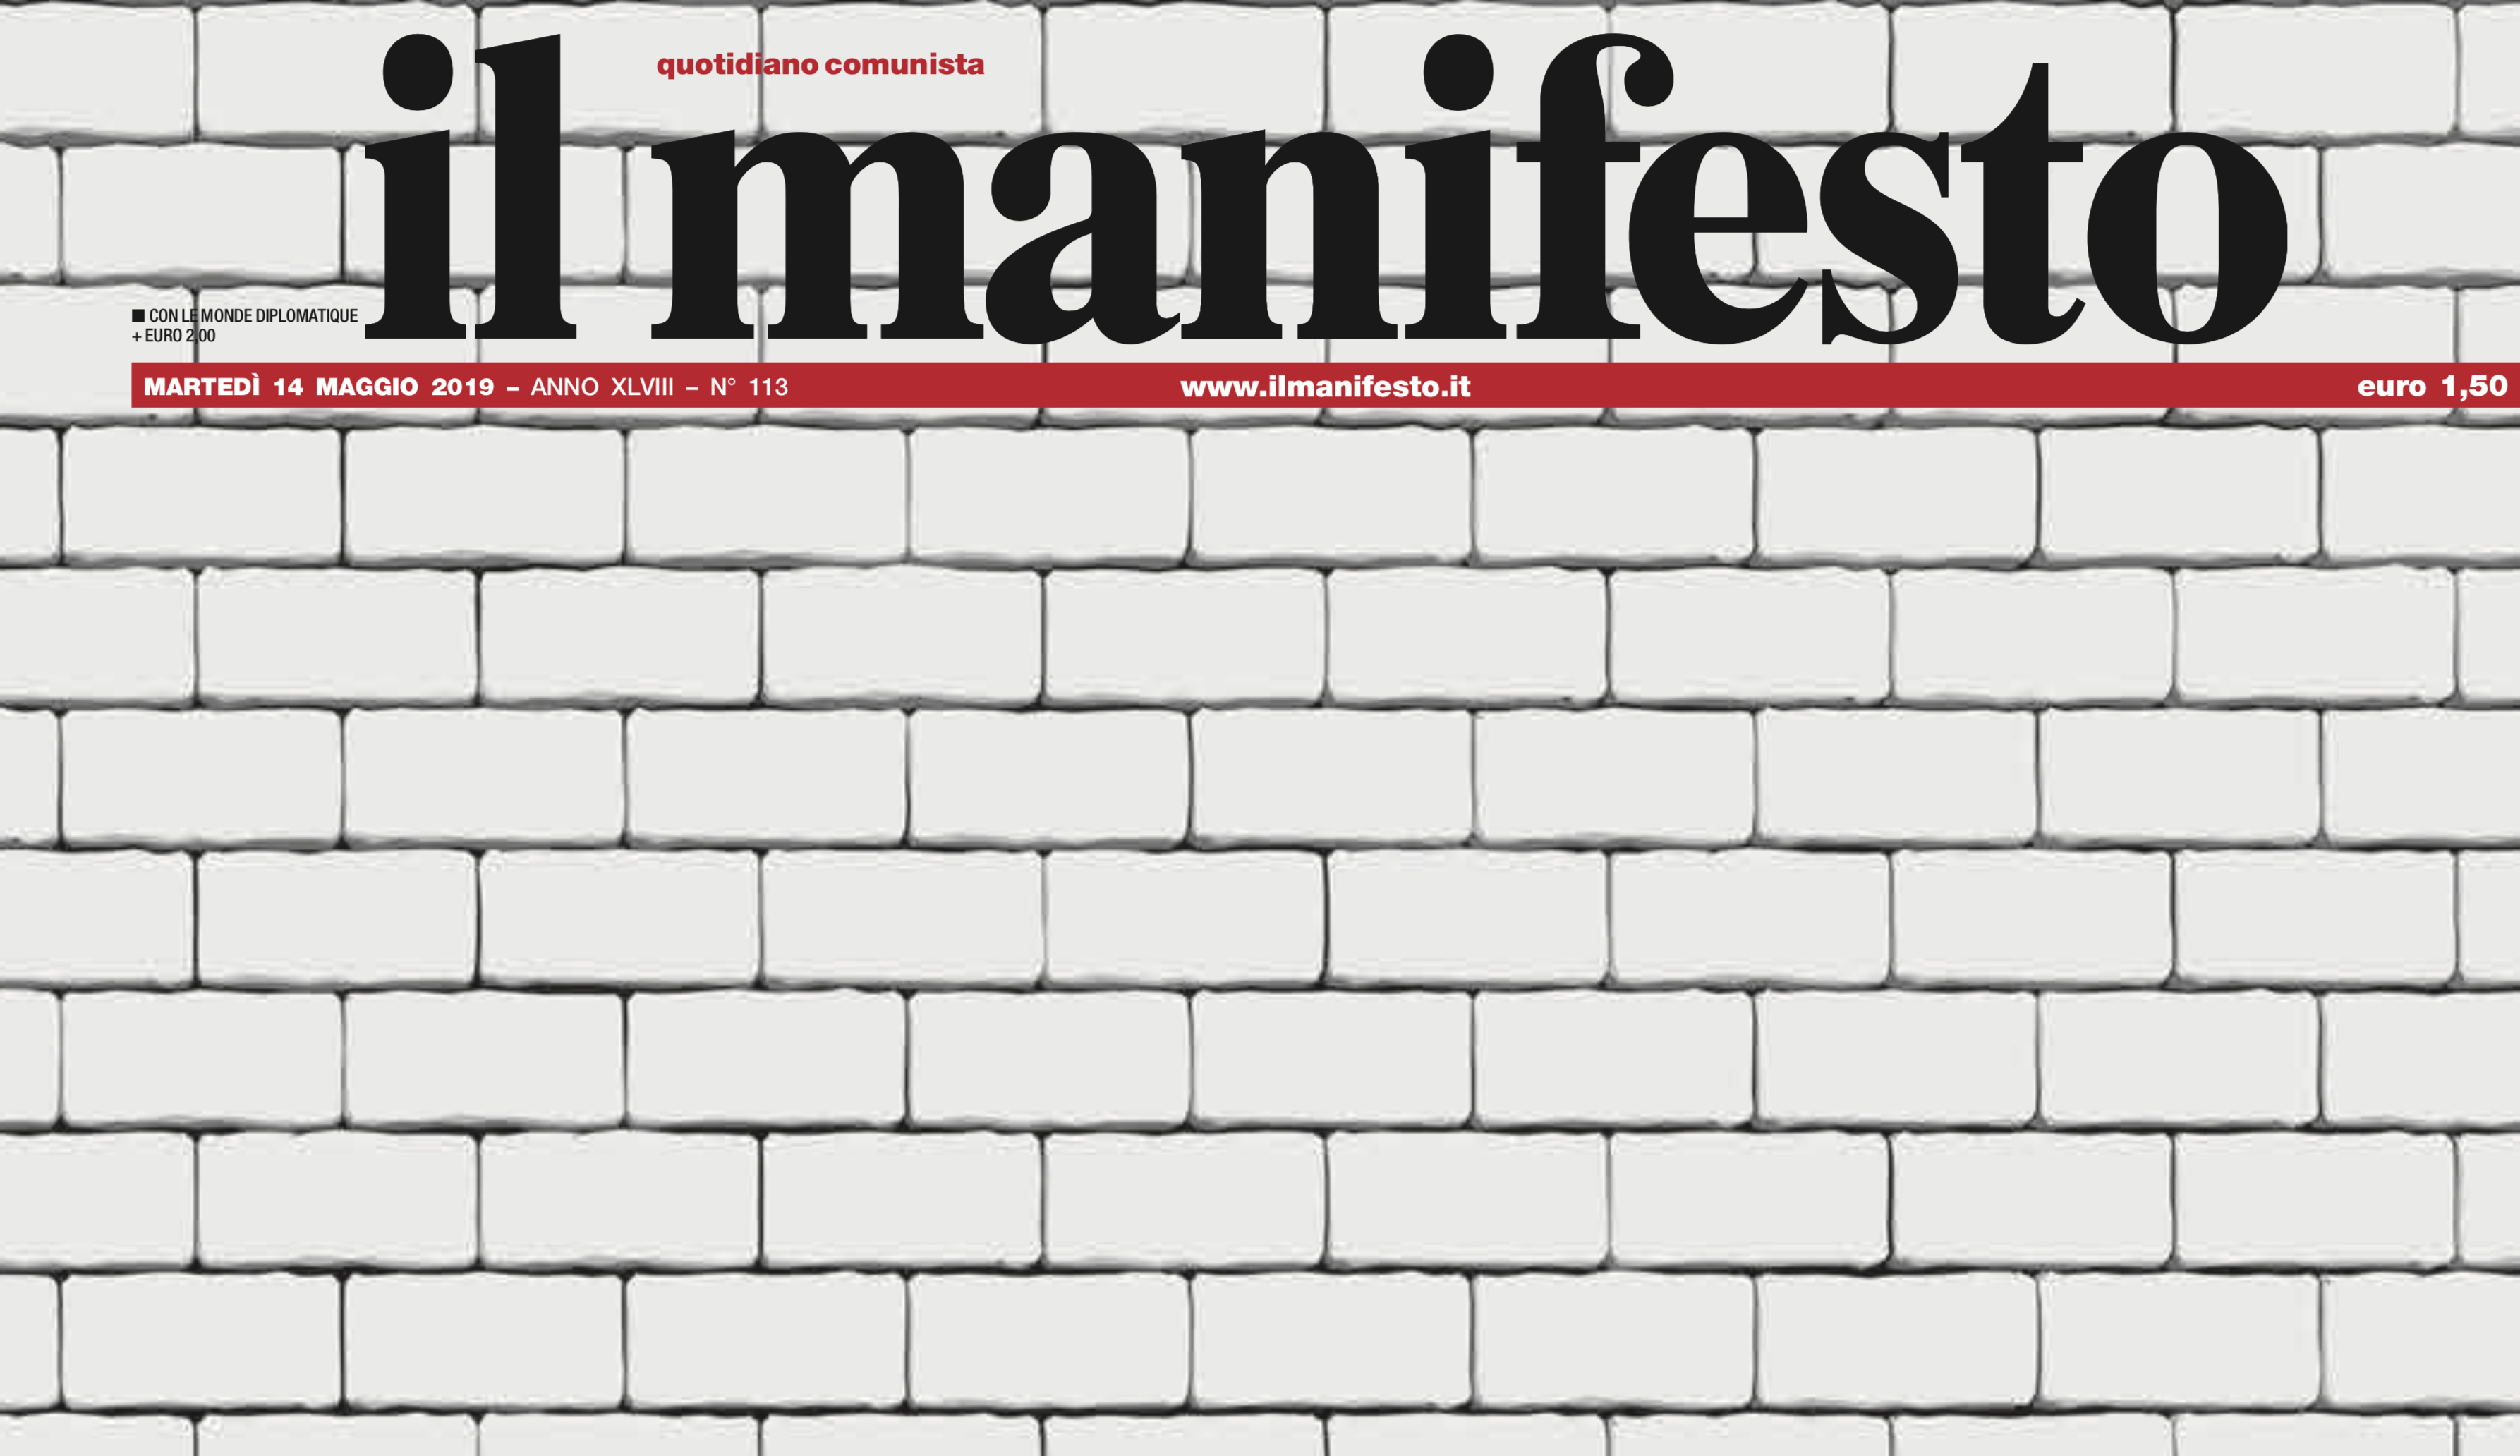 Will you help us break the wall? Join our biggest subscription campaign ever